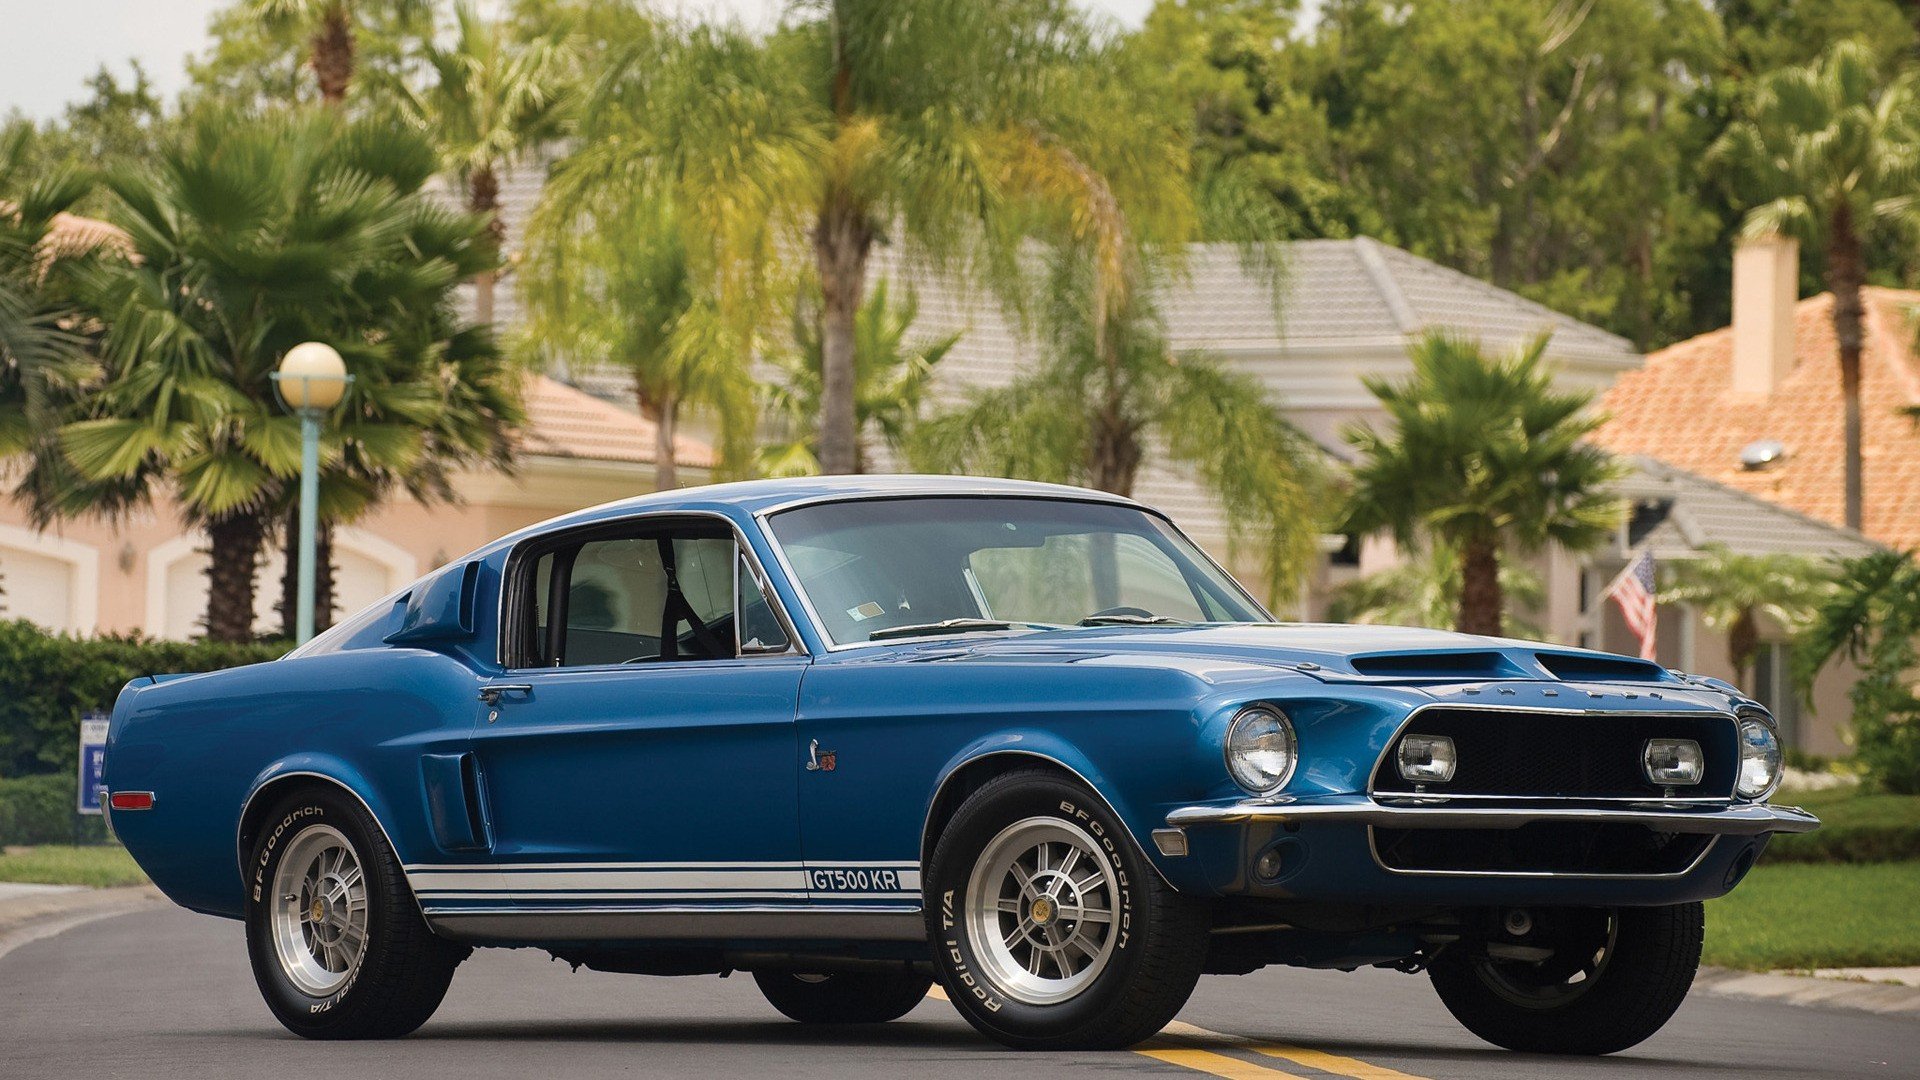 ford, Mustang, Shelby, Gt500, Auto Wallpaper